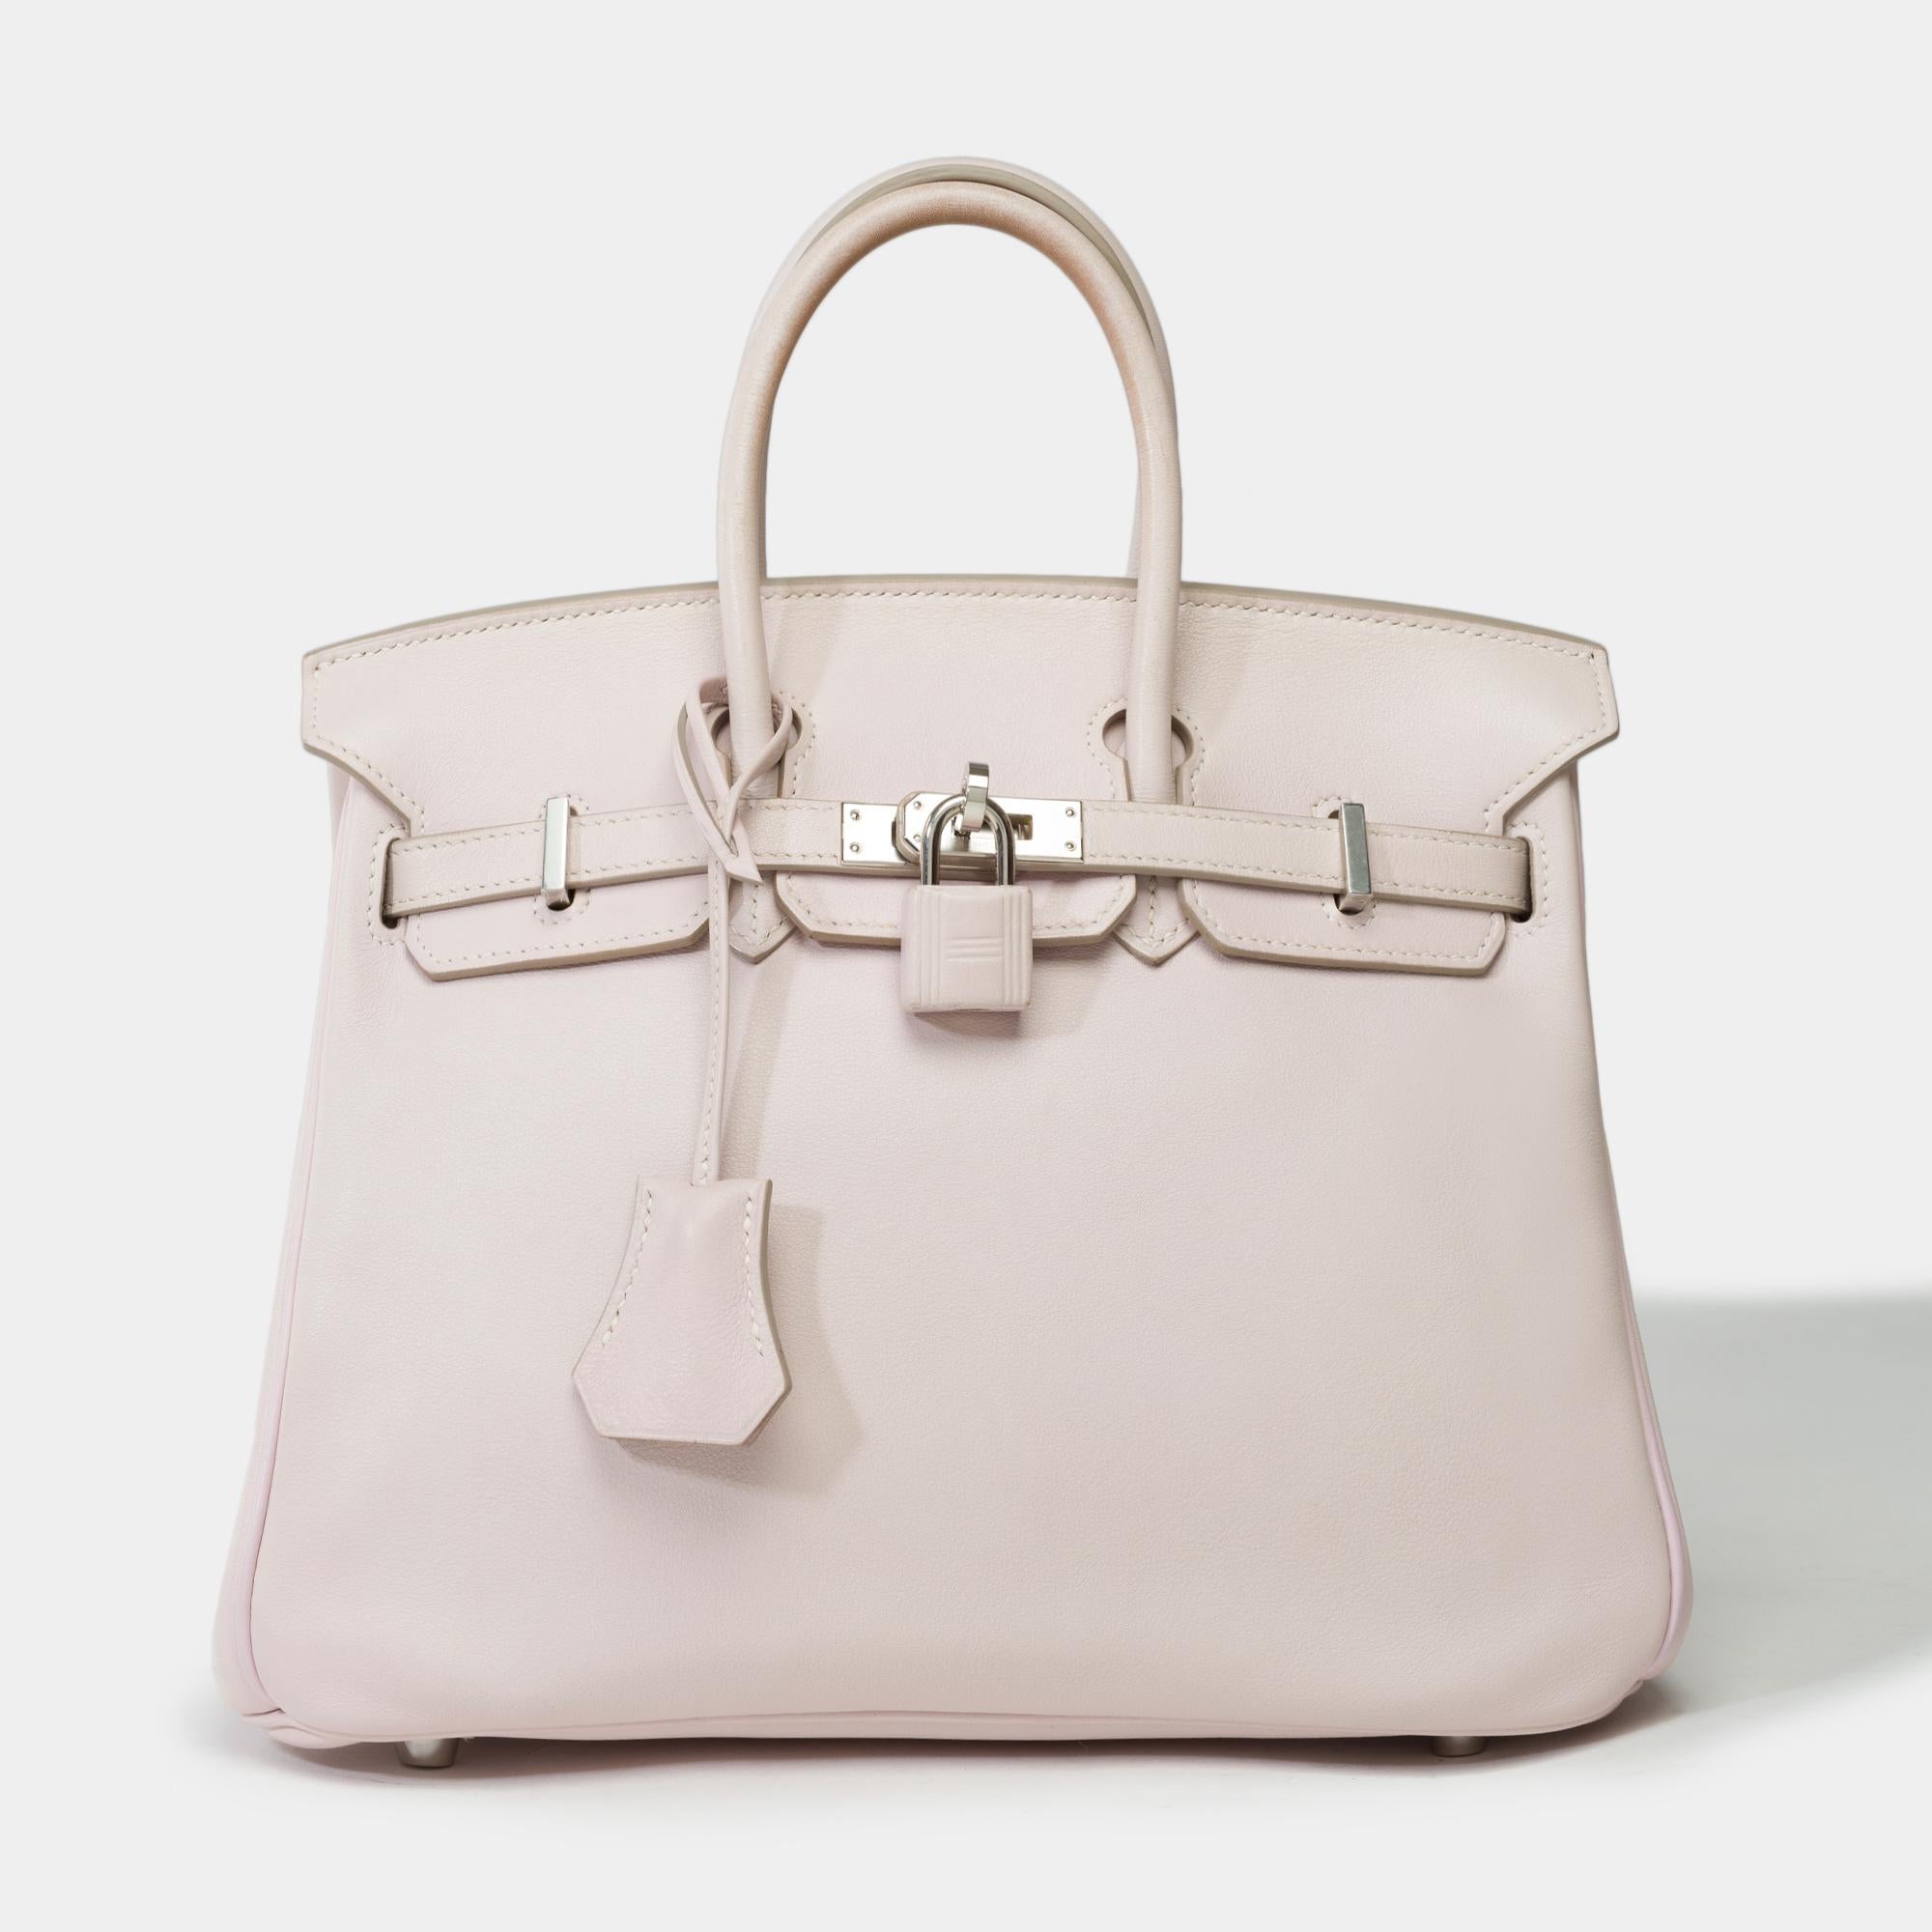 Stunning​ ​limited​ ​edition​ ​Hermès​ ​Birkin​ ​25​ ​in​ ​Swift​ ​Rose​ ​dragée​ ​calf​ ​leather,​ ​palladium​ ​silver​ ​metal​ ​trim​ ​,​ ​double​ ​handle​ ​in​ ​pink​ ​leather​ ​allowing​ ​a​ ​​ ​hand​ ​carry

Flap​ ​closure
Pink​ ​leather​